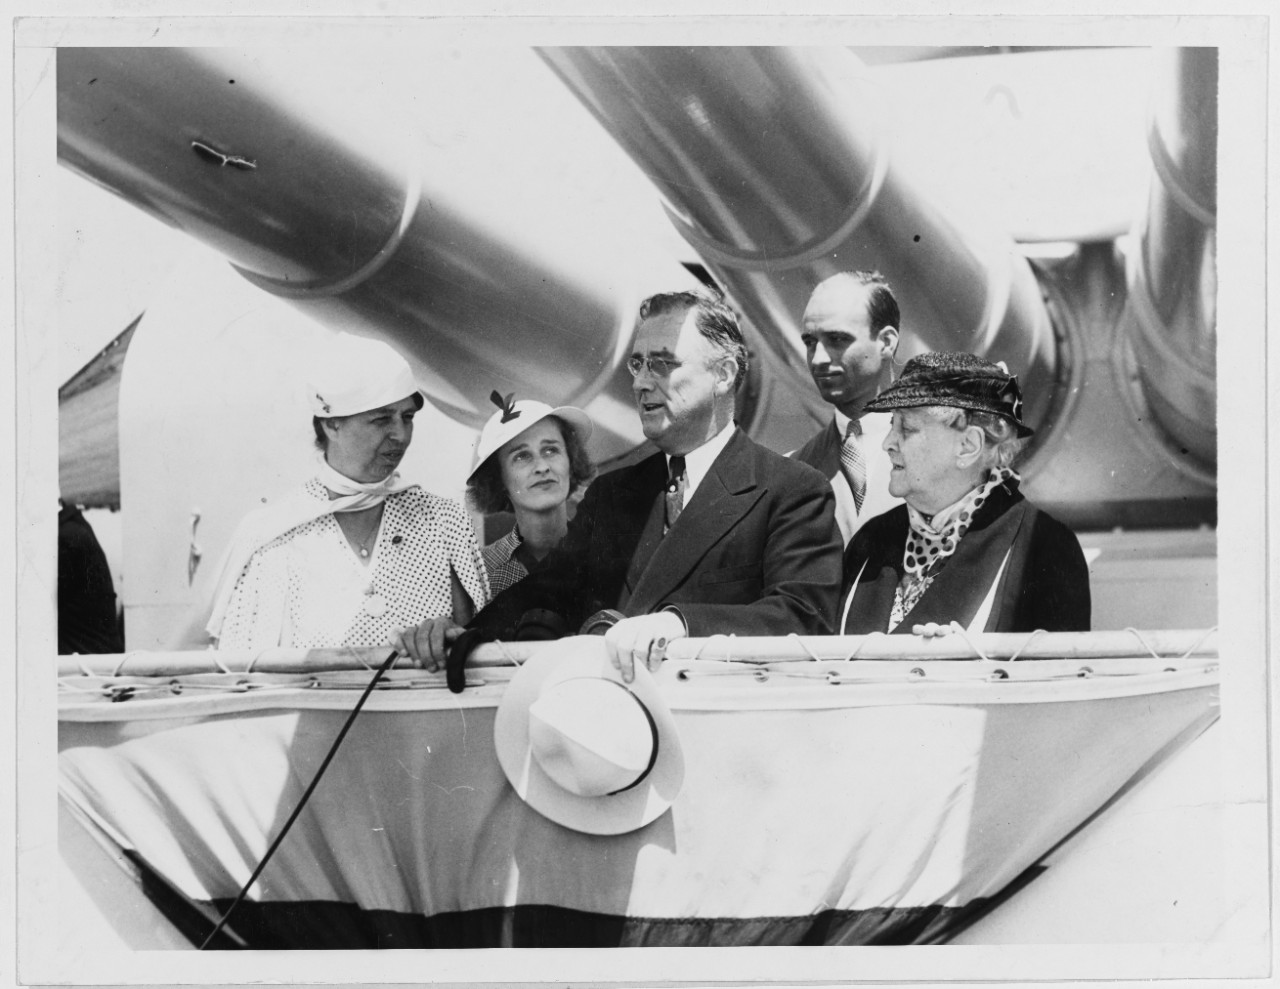 President Franklin D. Roosevelt at fleet review, New York, 31 May 1934.